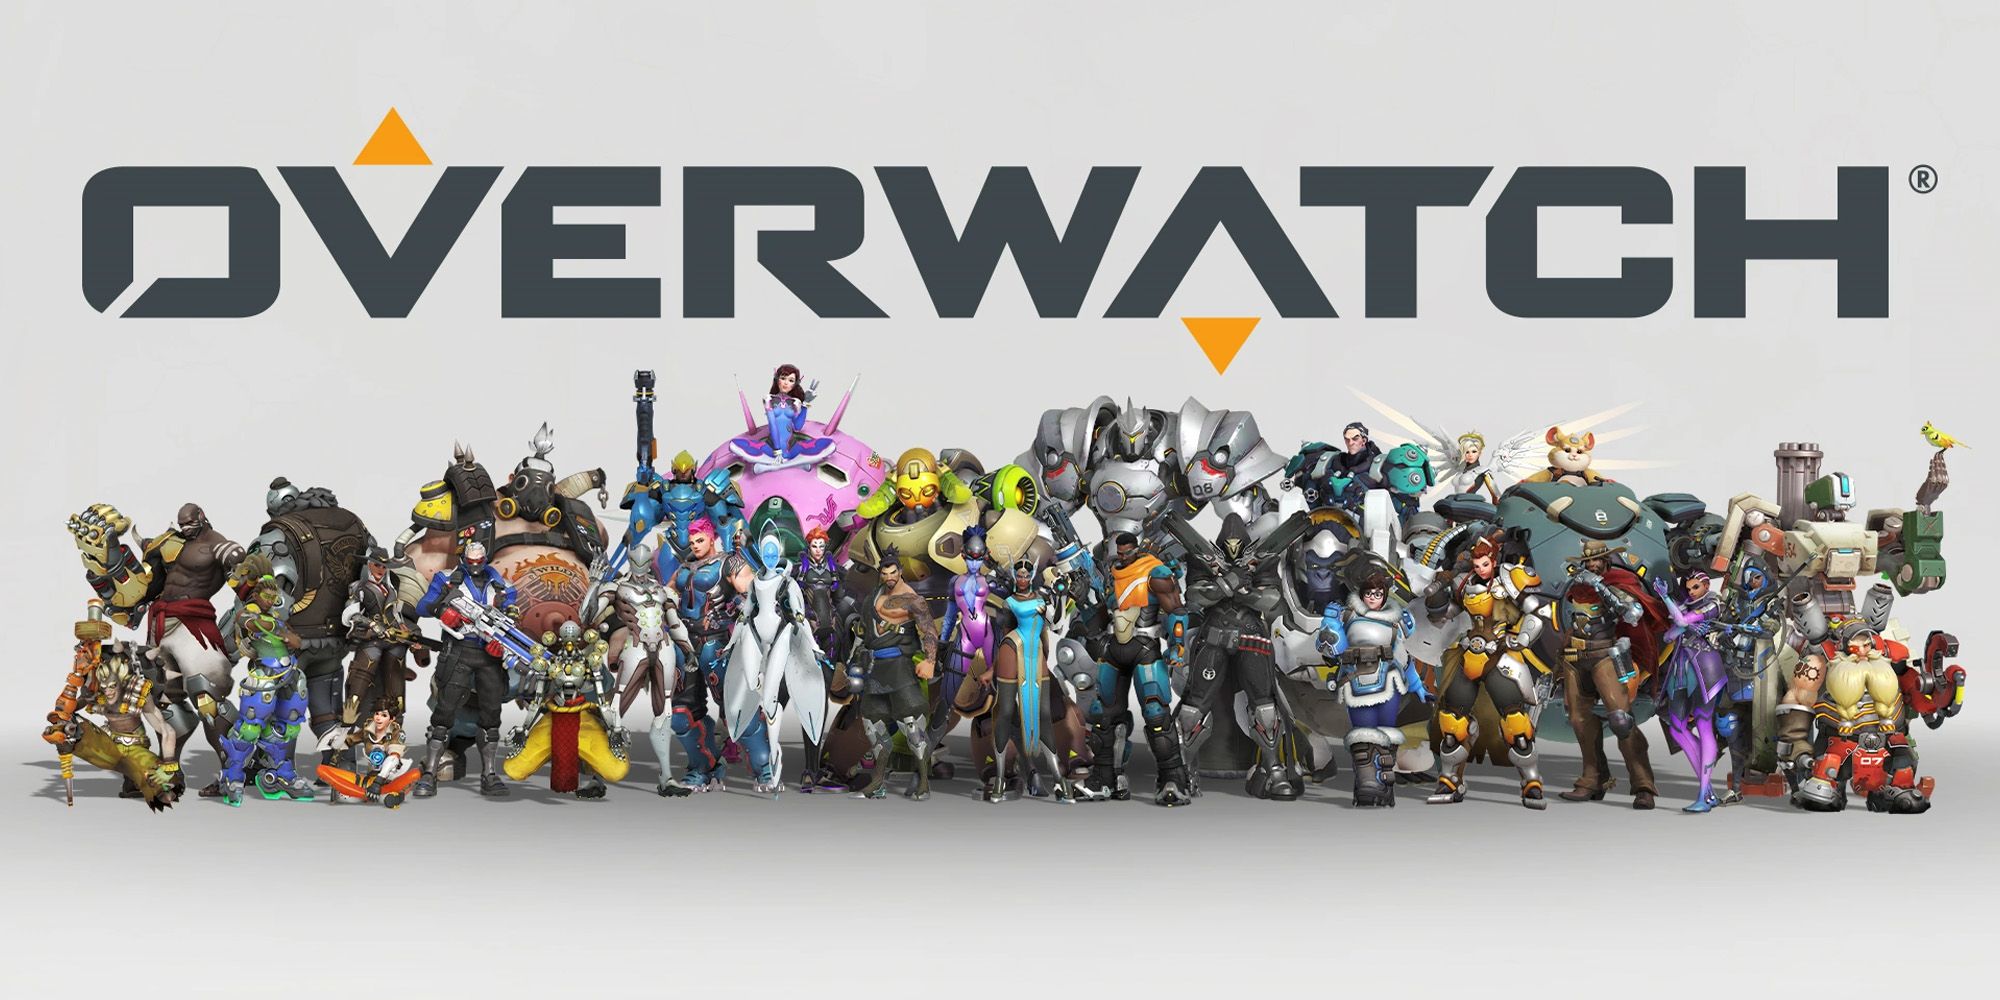 Lineup of heroes from Overwatch 1 with the game's logo above.